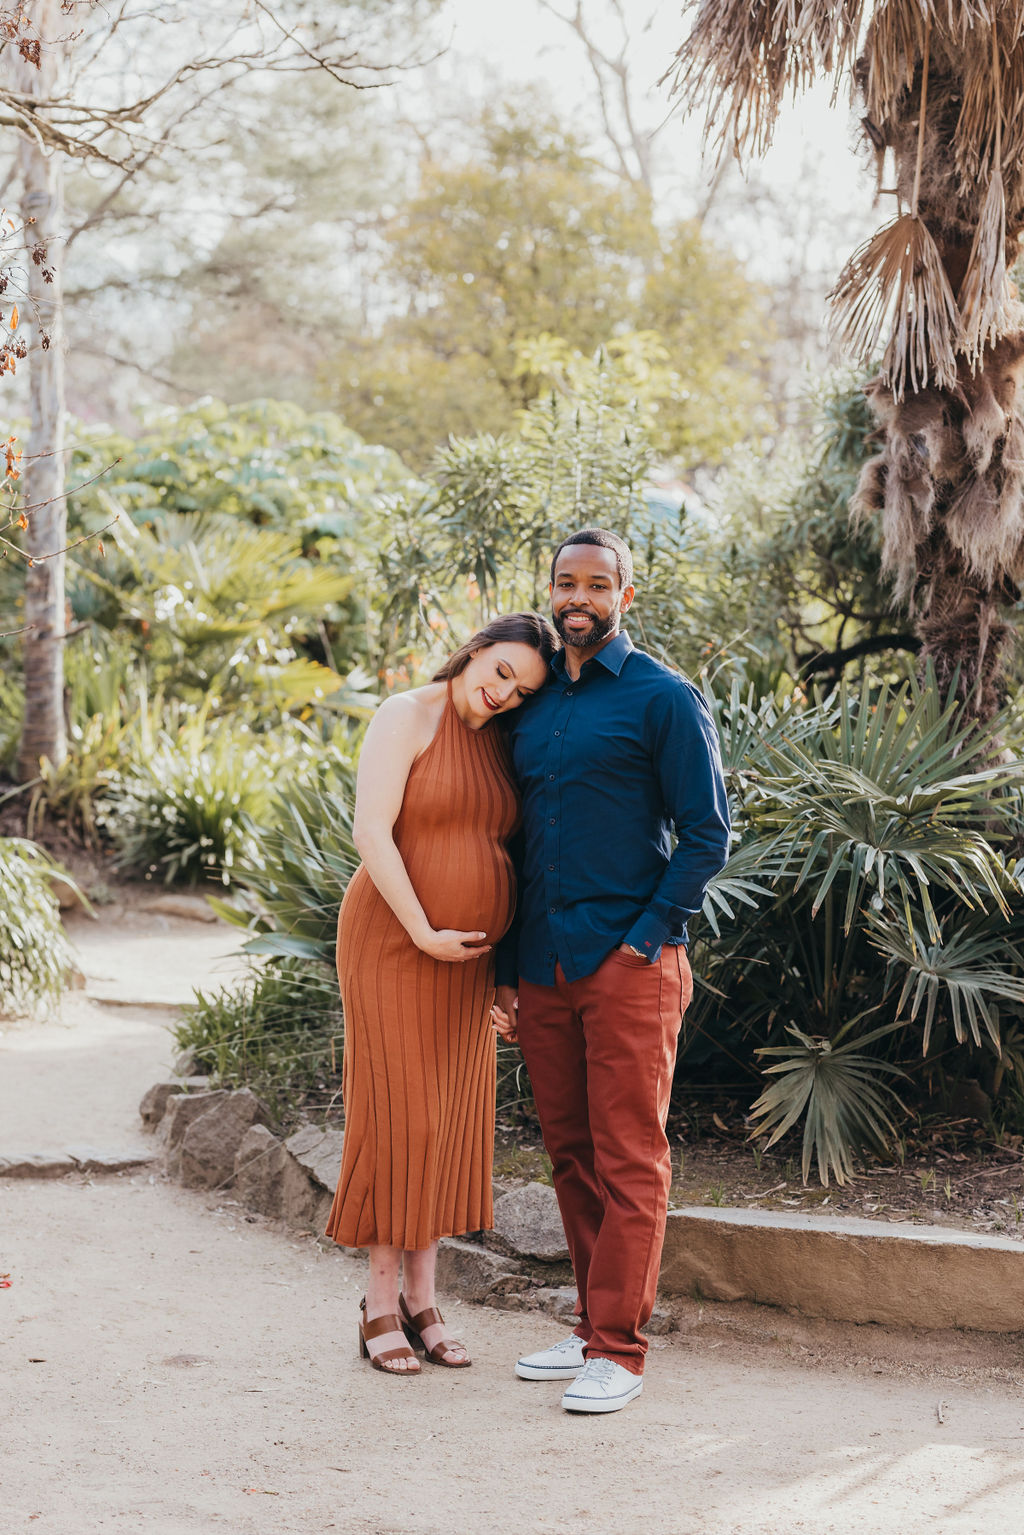 A couple expecting a baby standing together in a garden, with the woman cradling her pregnant belly at their spring maternity photos